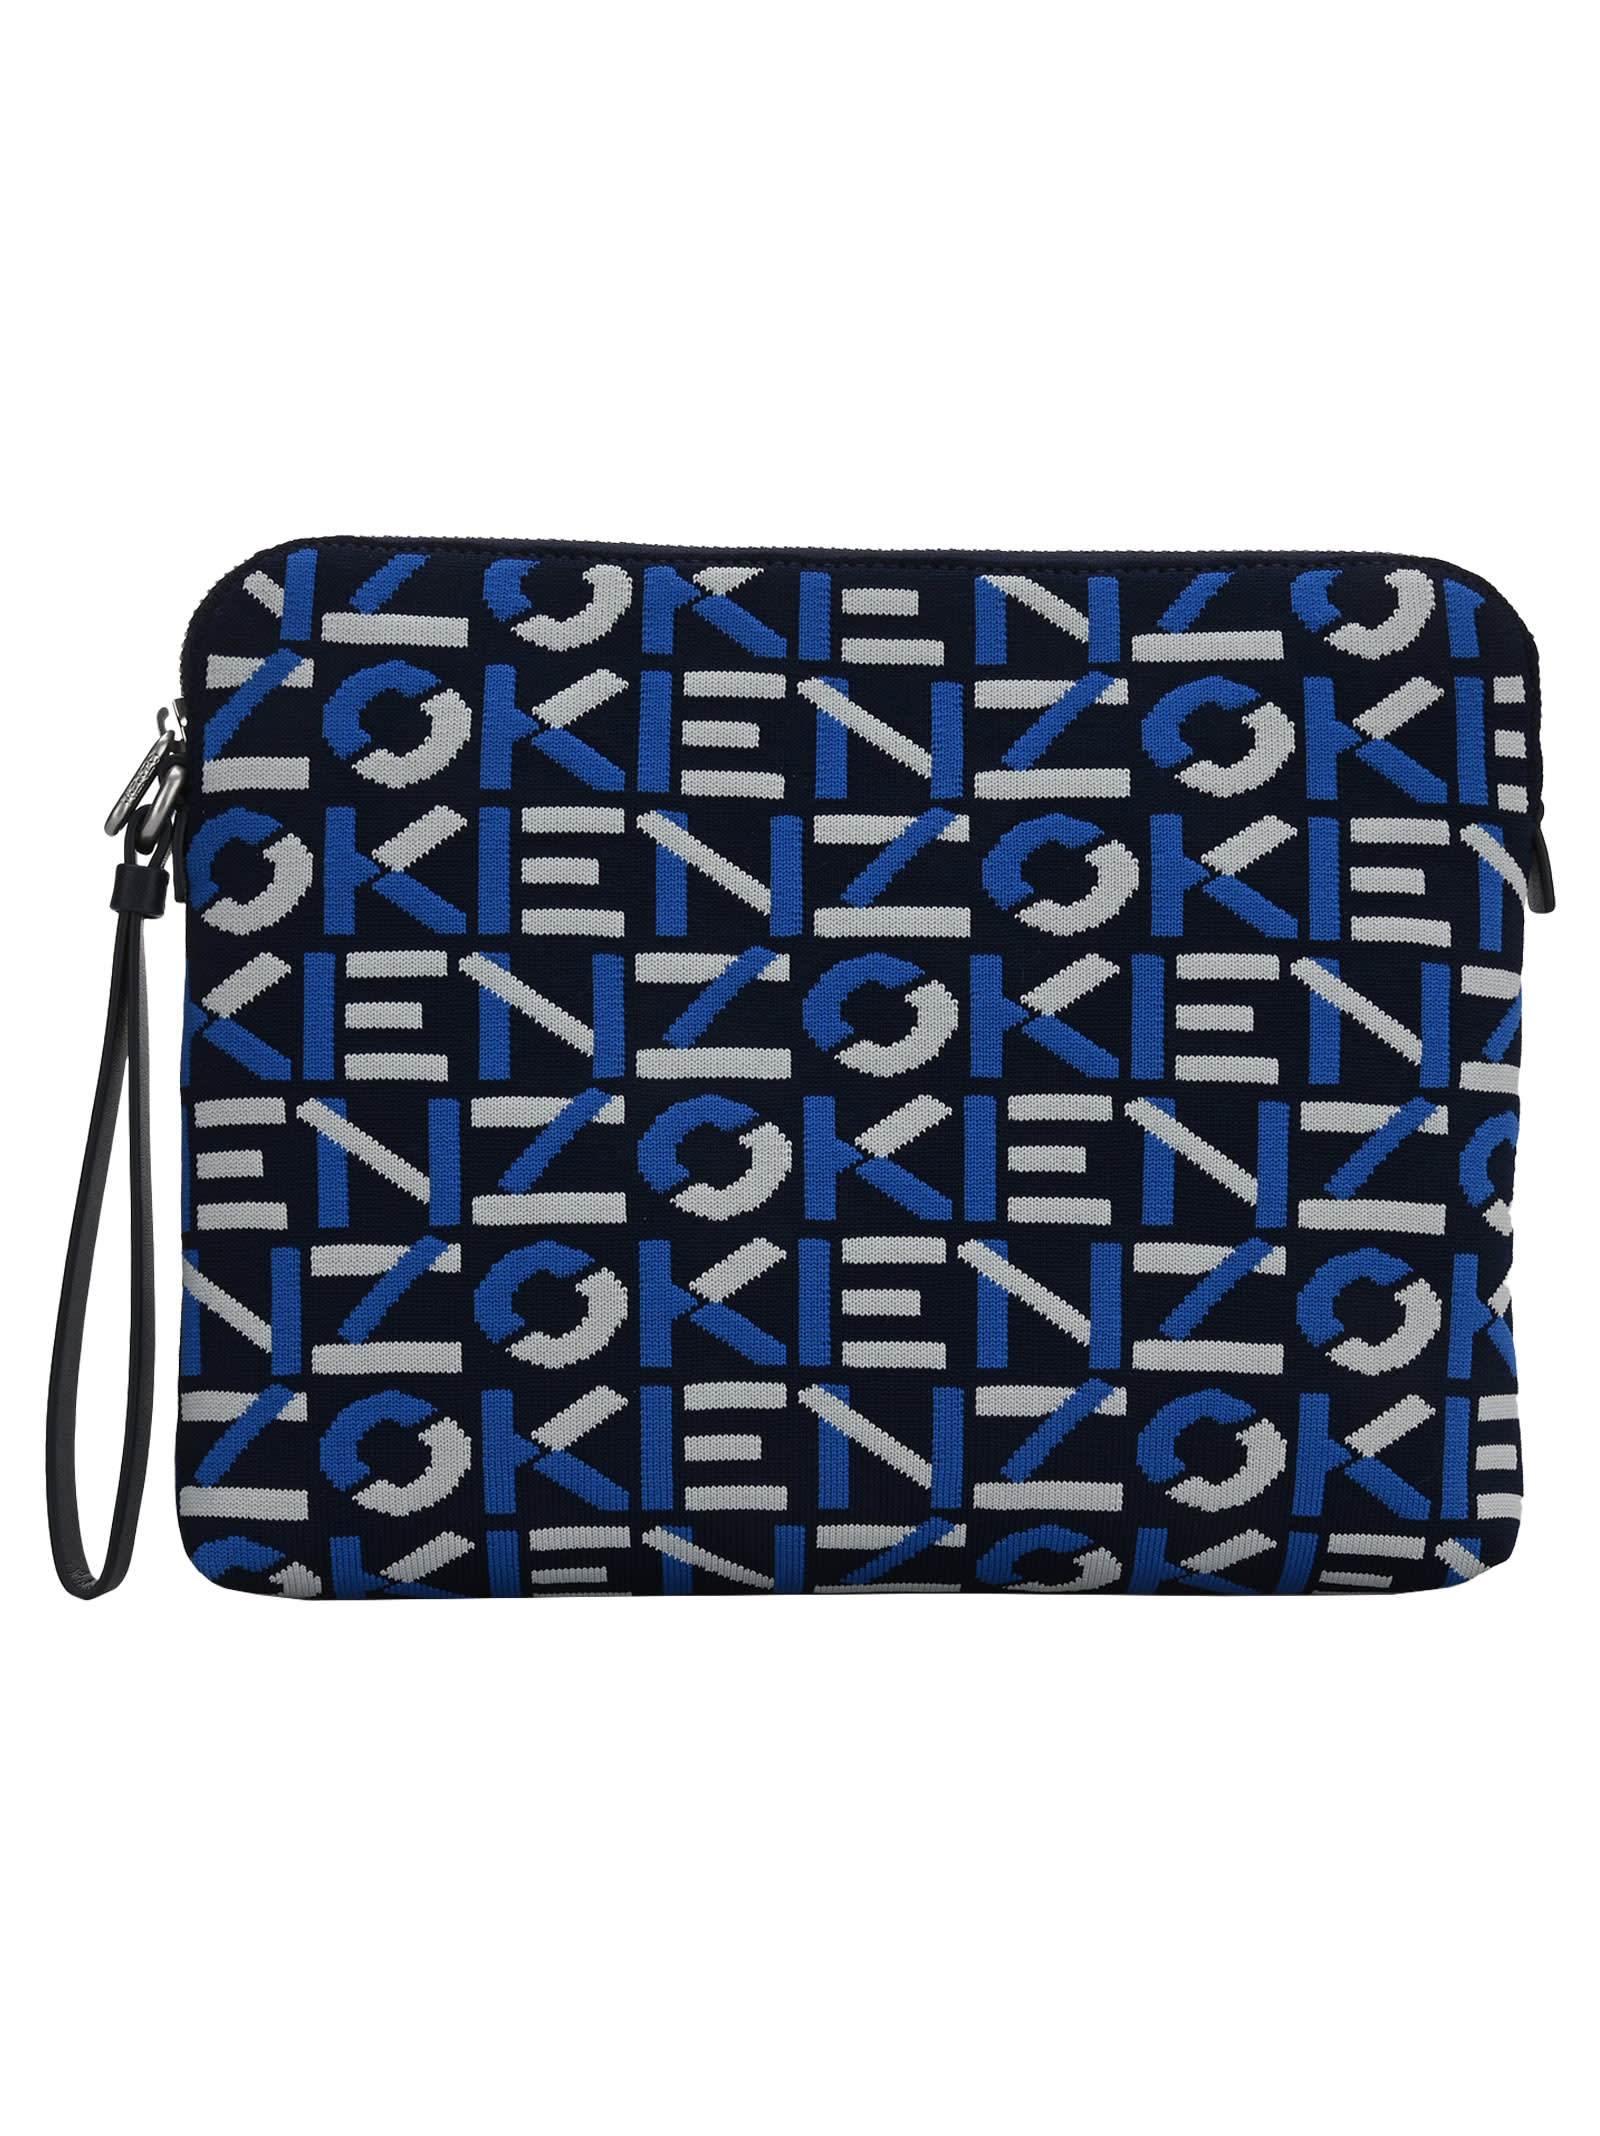 KENZO SKUBA CLUTCH MADE OF RECYCLED MATERIAL,11749501